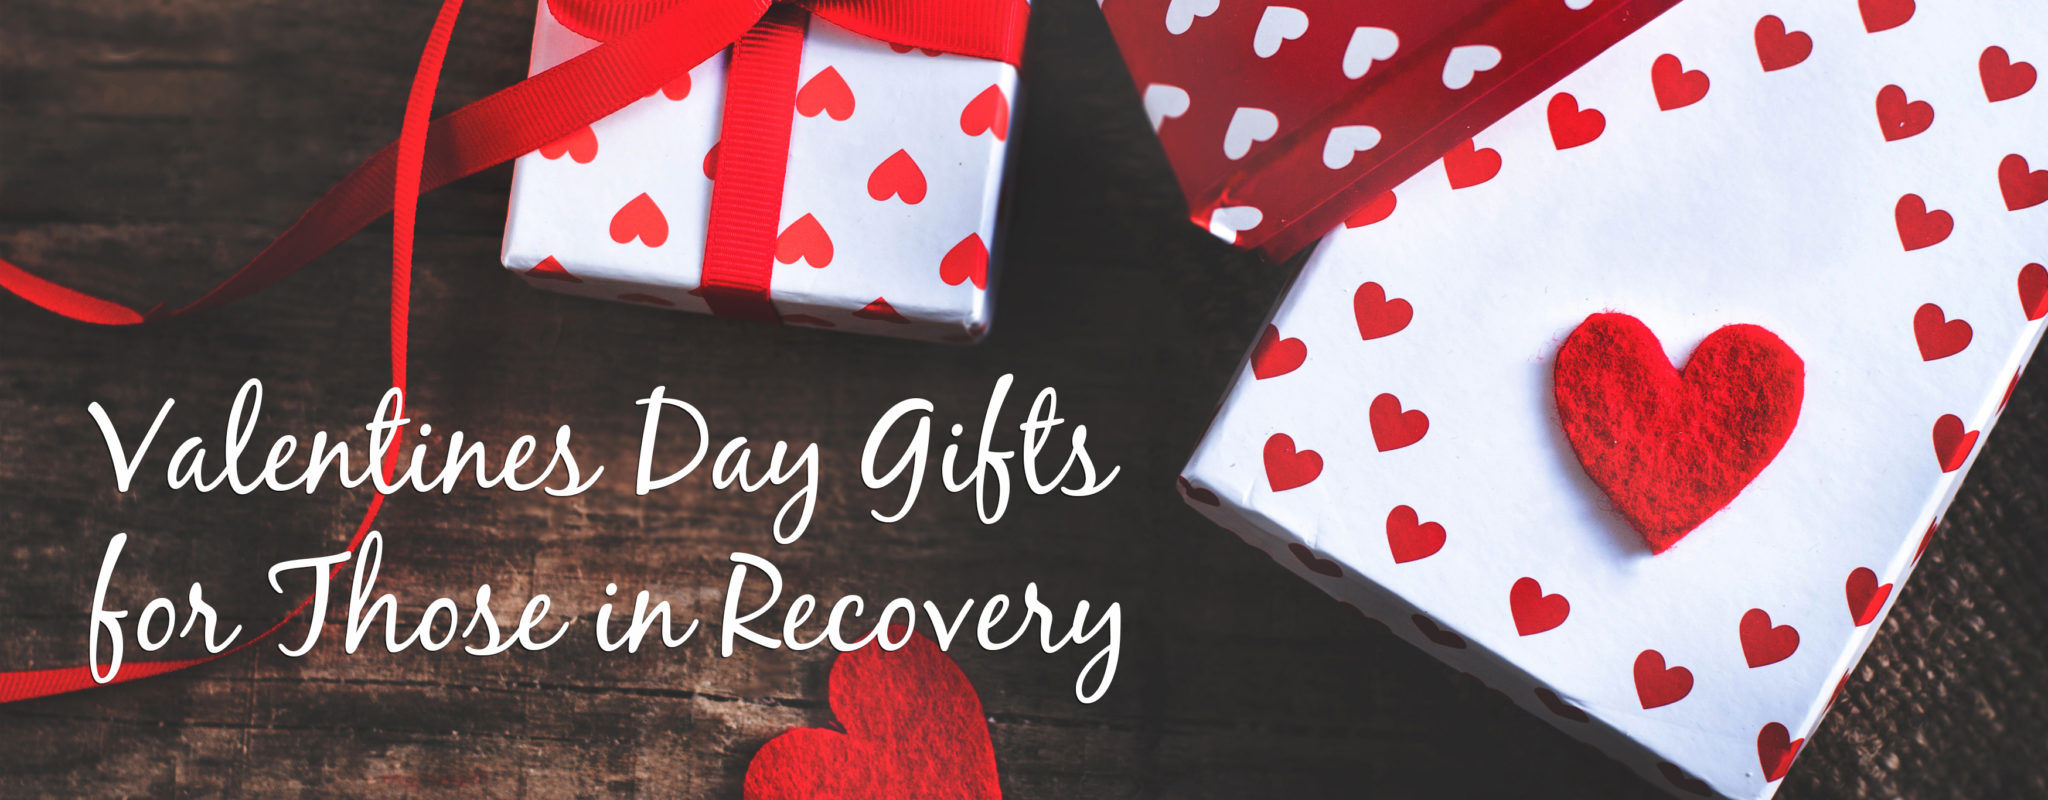 Valentines Day Gift Ideas for Recovering Addicts